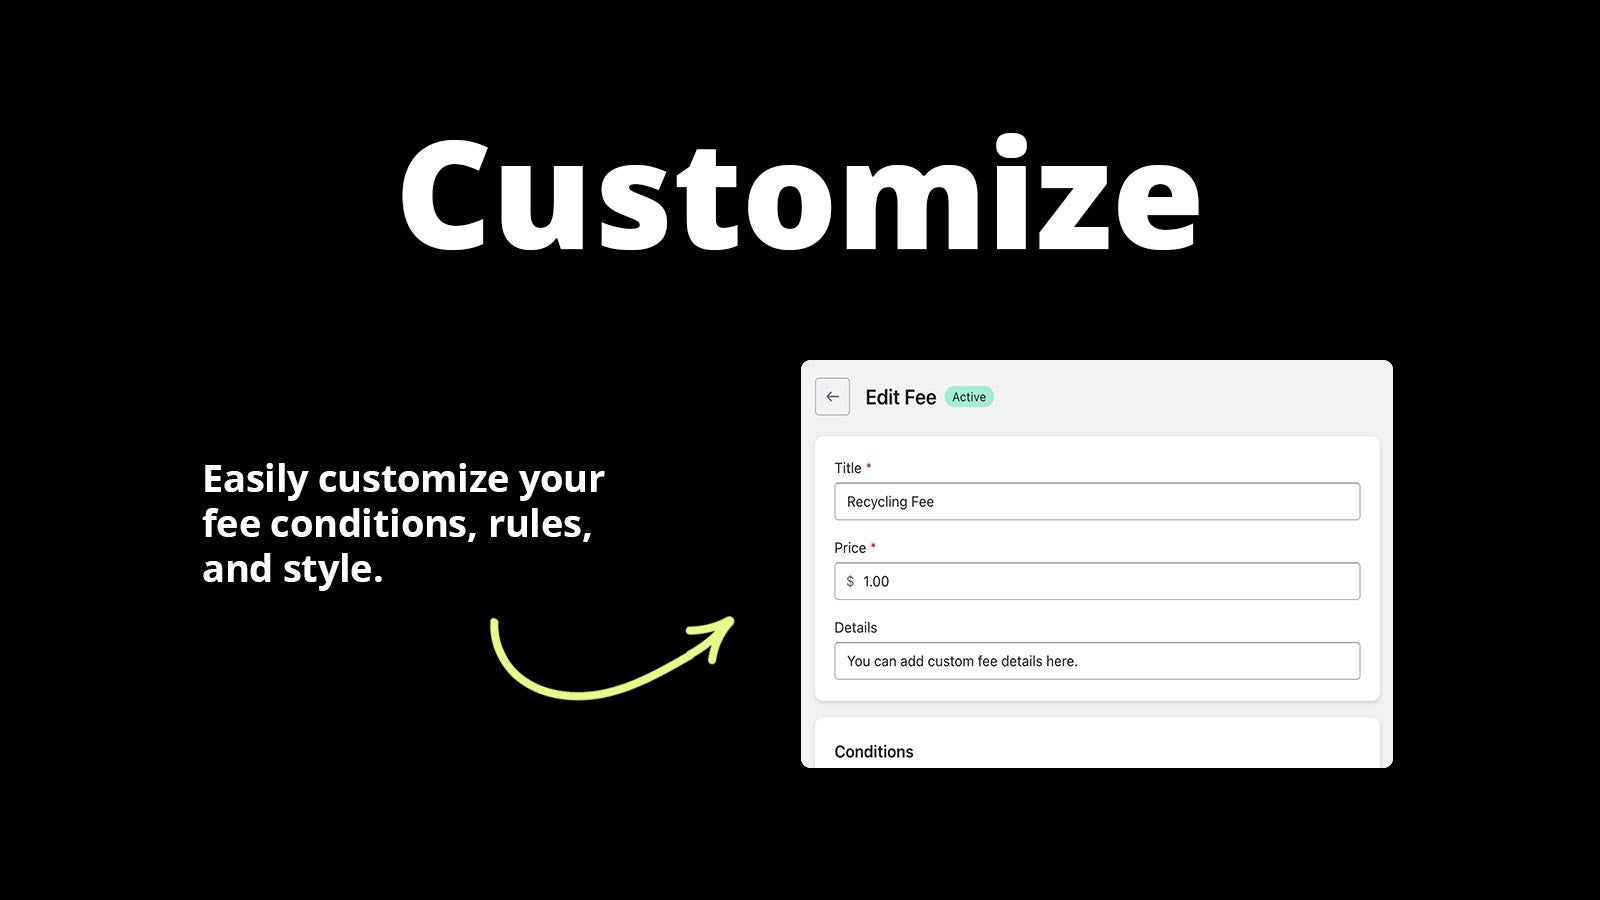 Customize - Easily customize fee conditions, rules, and style